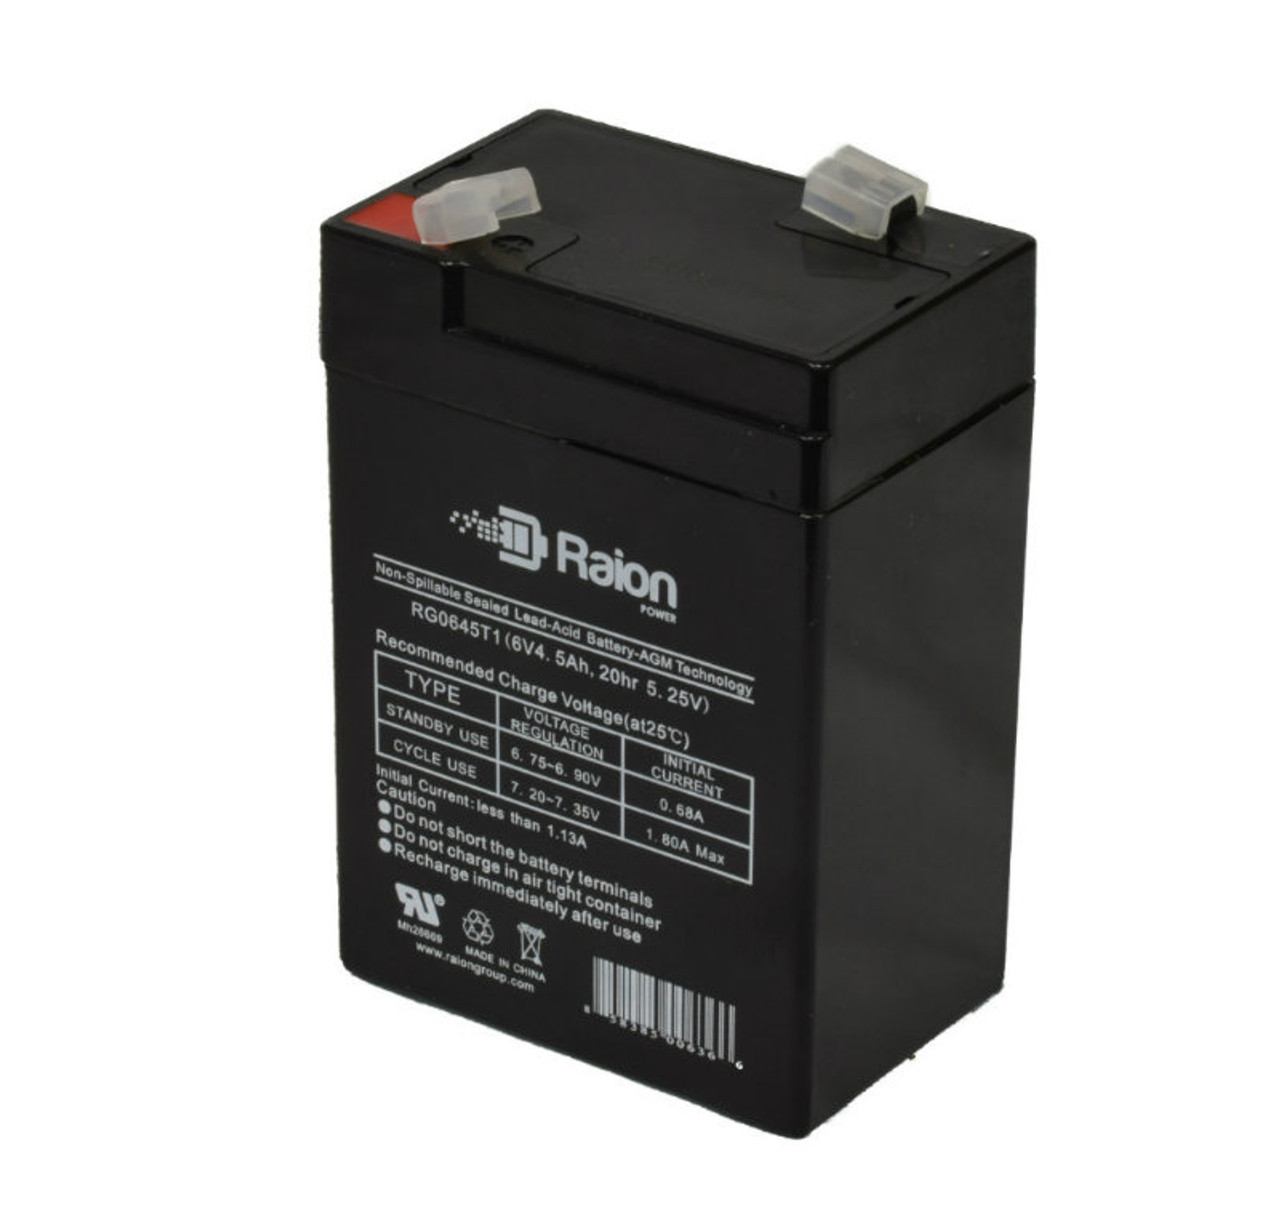 Raion Power RG0645T1 6V 4.5Ah Replacement Battery Cartridge for Dual-Lite HCXURB